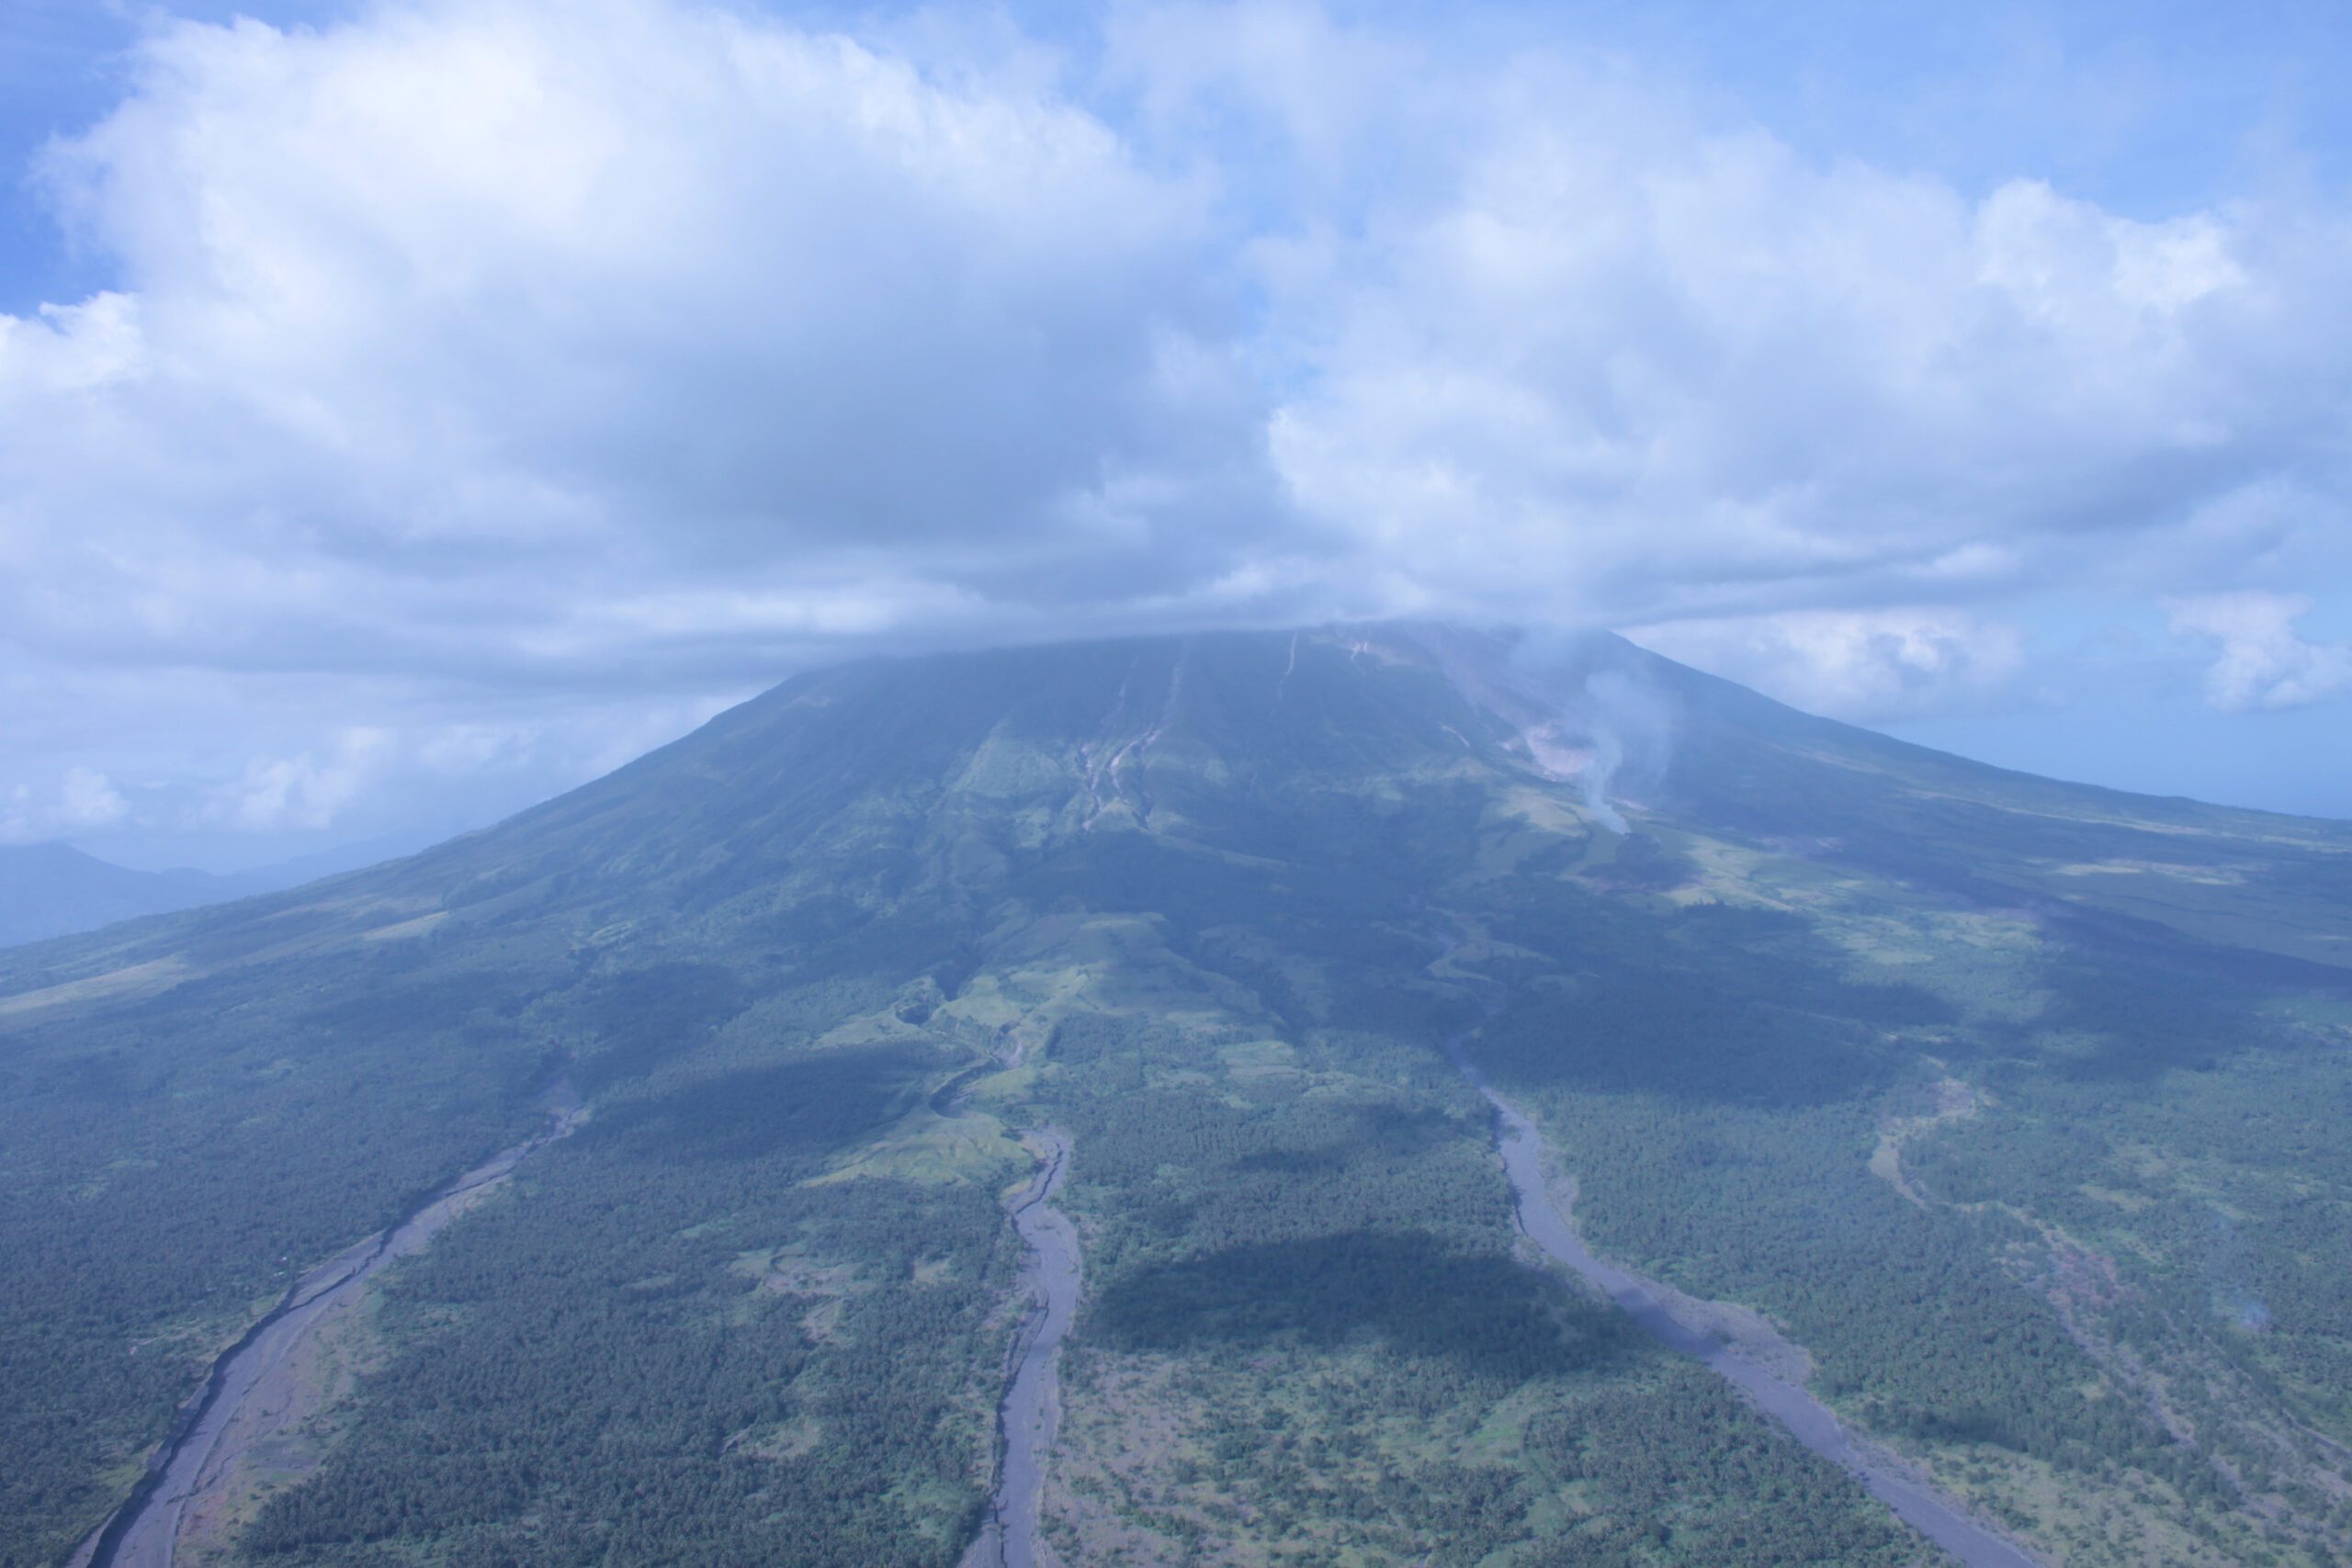 Phivolcs warns of lahar flow from Mayon after rainfall